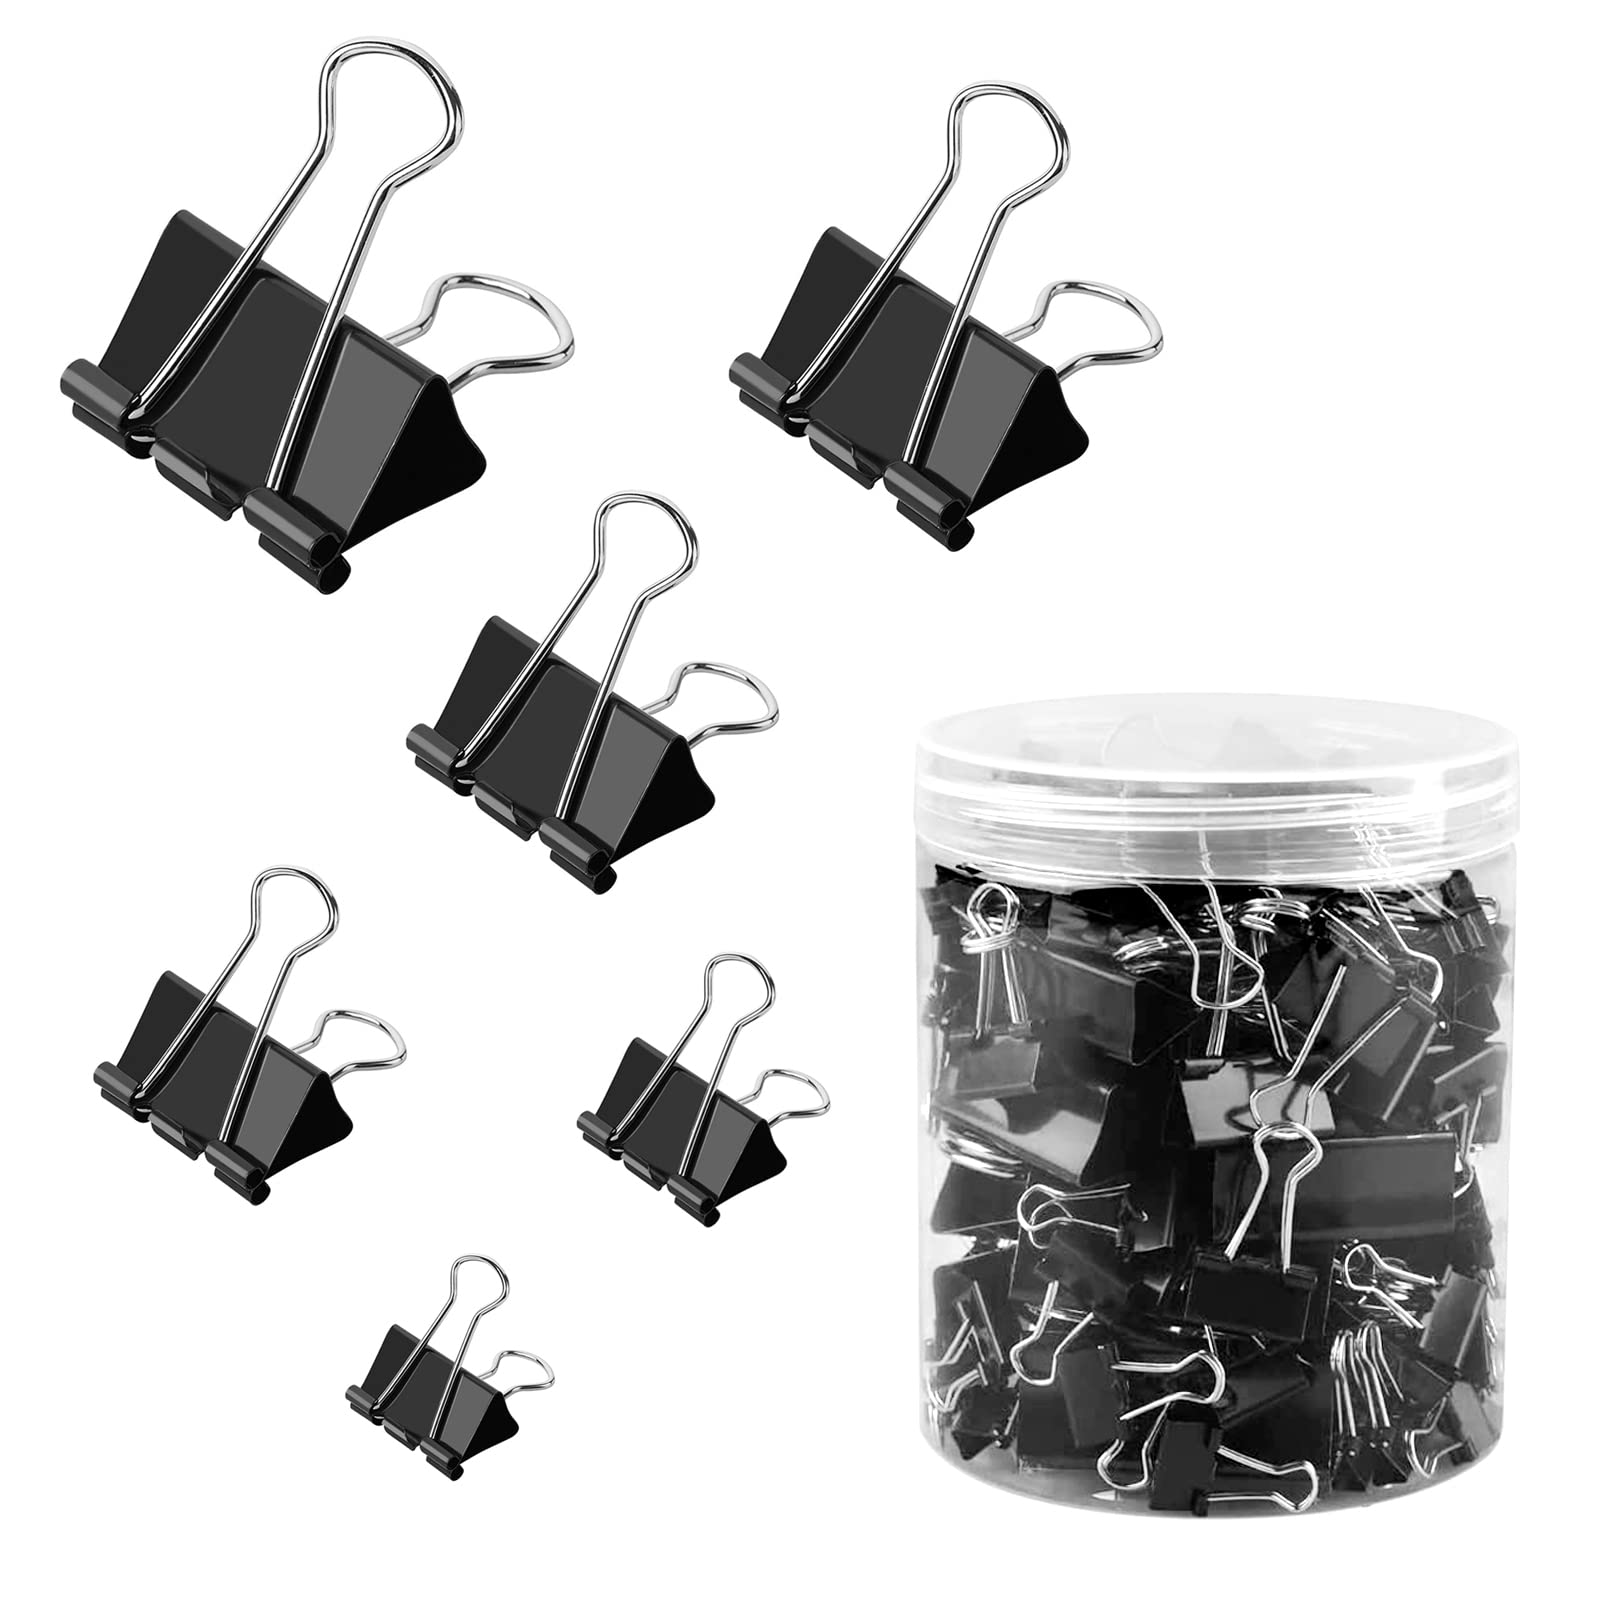 130Pcs Paper Binder Clips Paper Clamps, PIOGHAX 6 Assorted Sizes Metal Binder Clips with Cylinder Plastic Suitable for Organizing Paper for Use in Offices, School Studies, Students and Office Workers